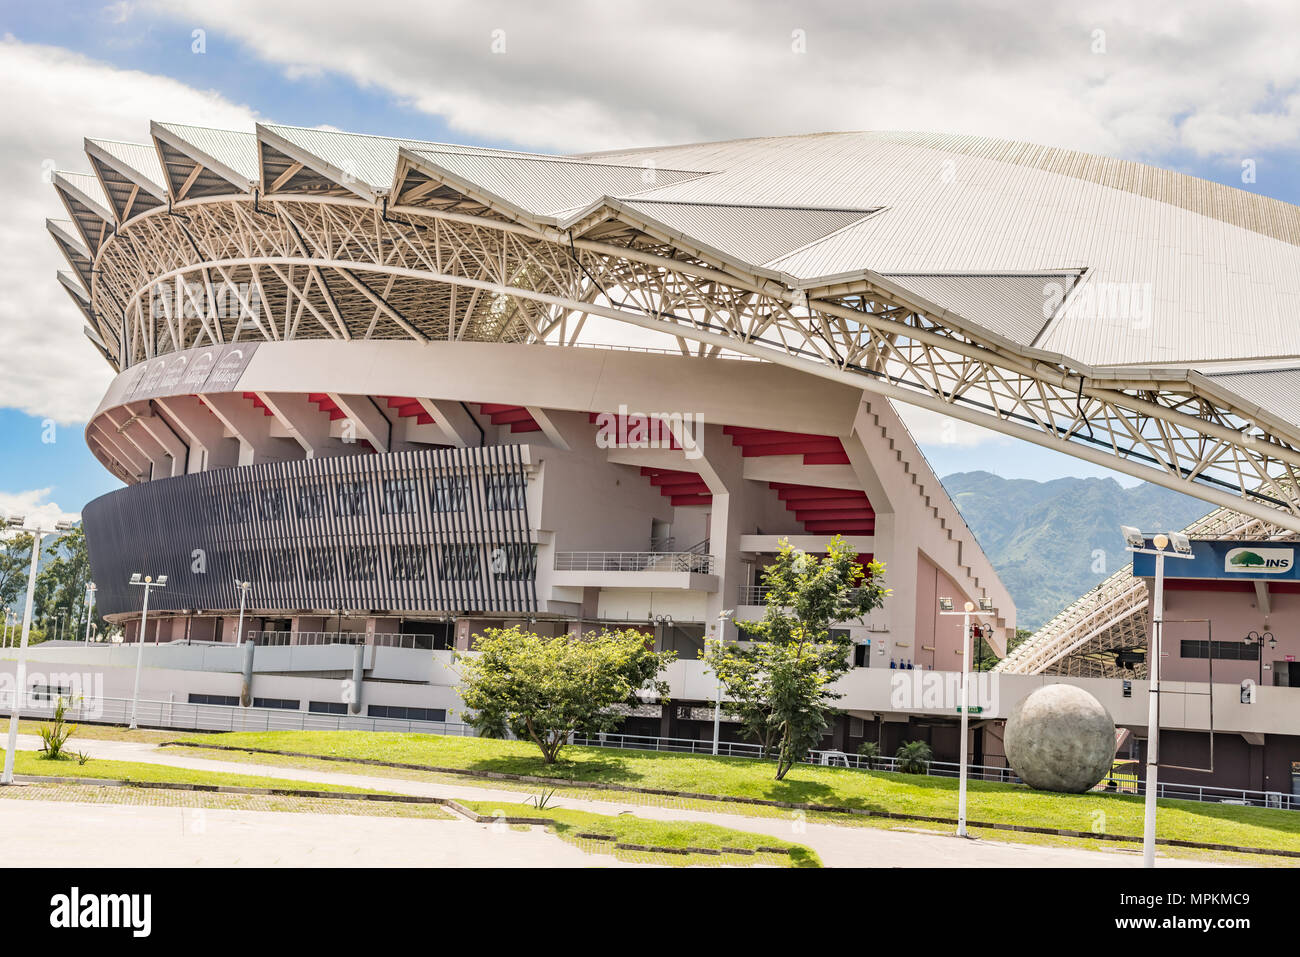 The National Stadium of Costa Rica is a multipurpose stadium. The stadium was completed in 2011. The Chinese government financed the construction of t Stock Photo